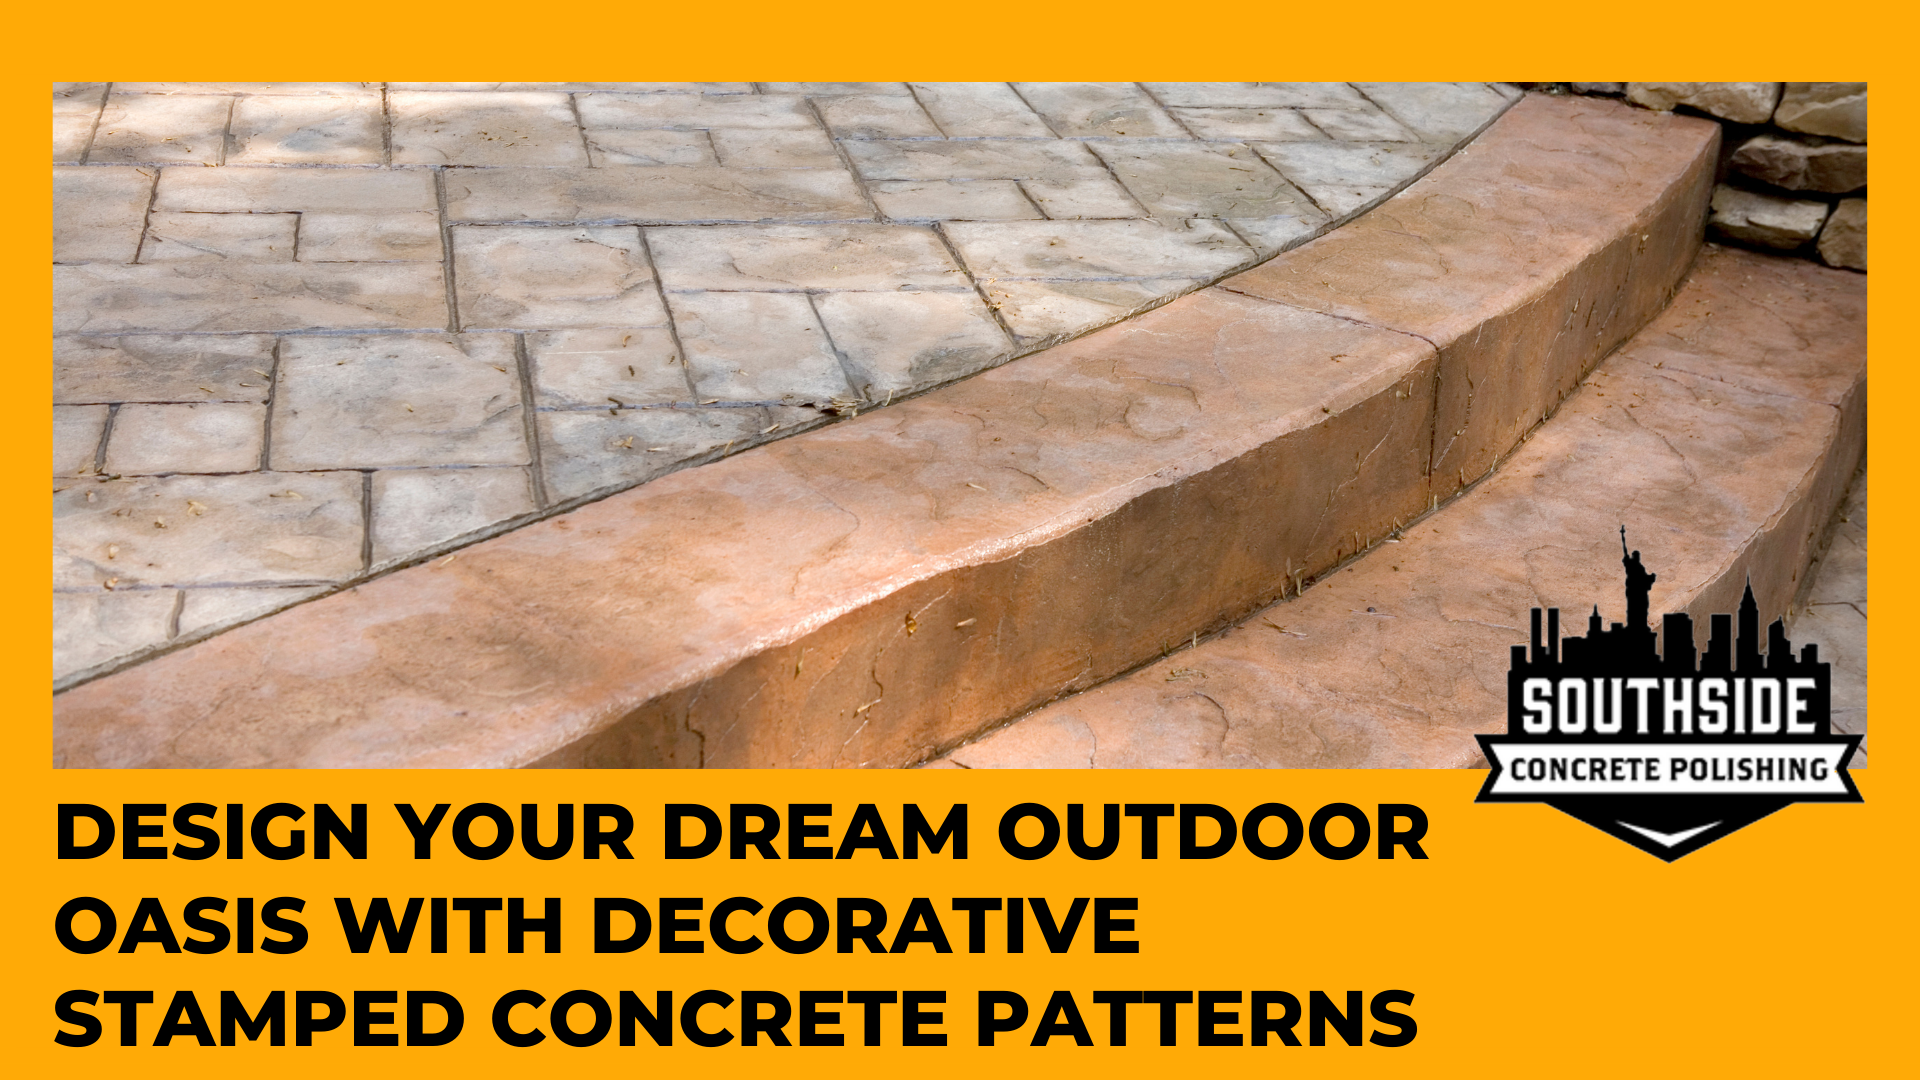 Design Your Dream Outdoor Oasis with Decorative Stamped Concrete 9